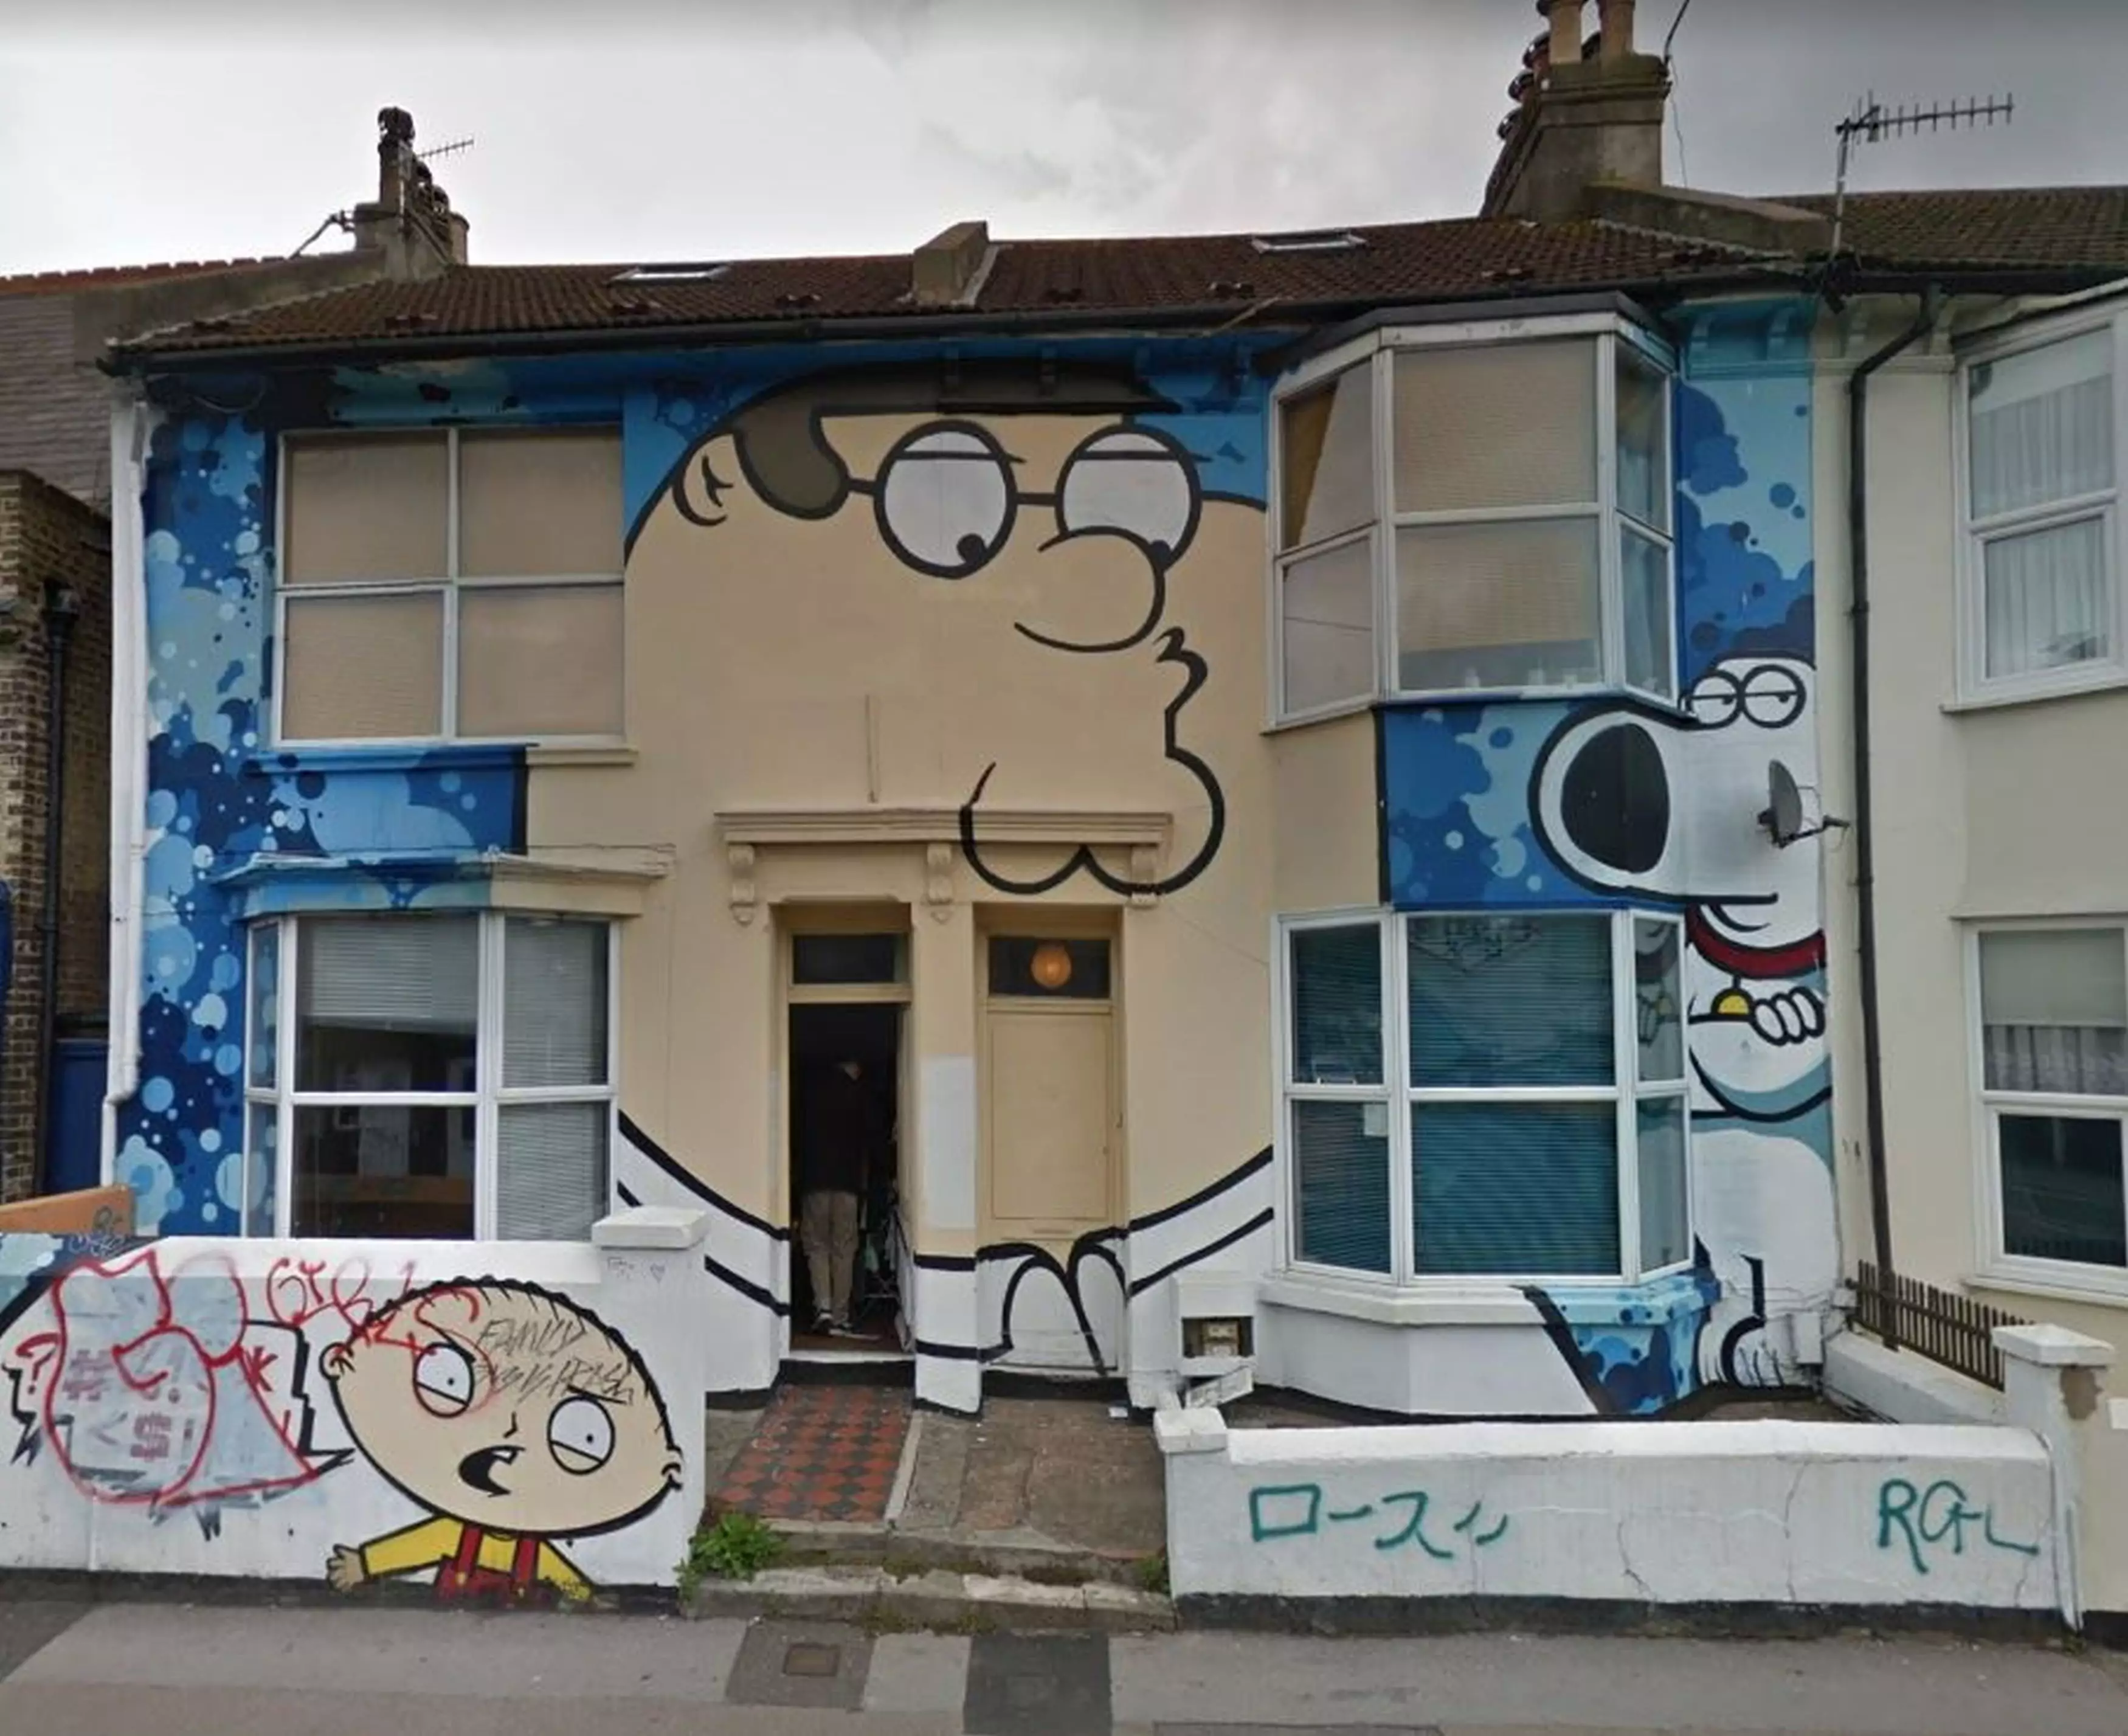 The same artist has made his mark on other properties in Brighton (